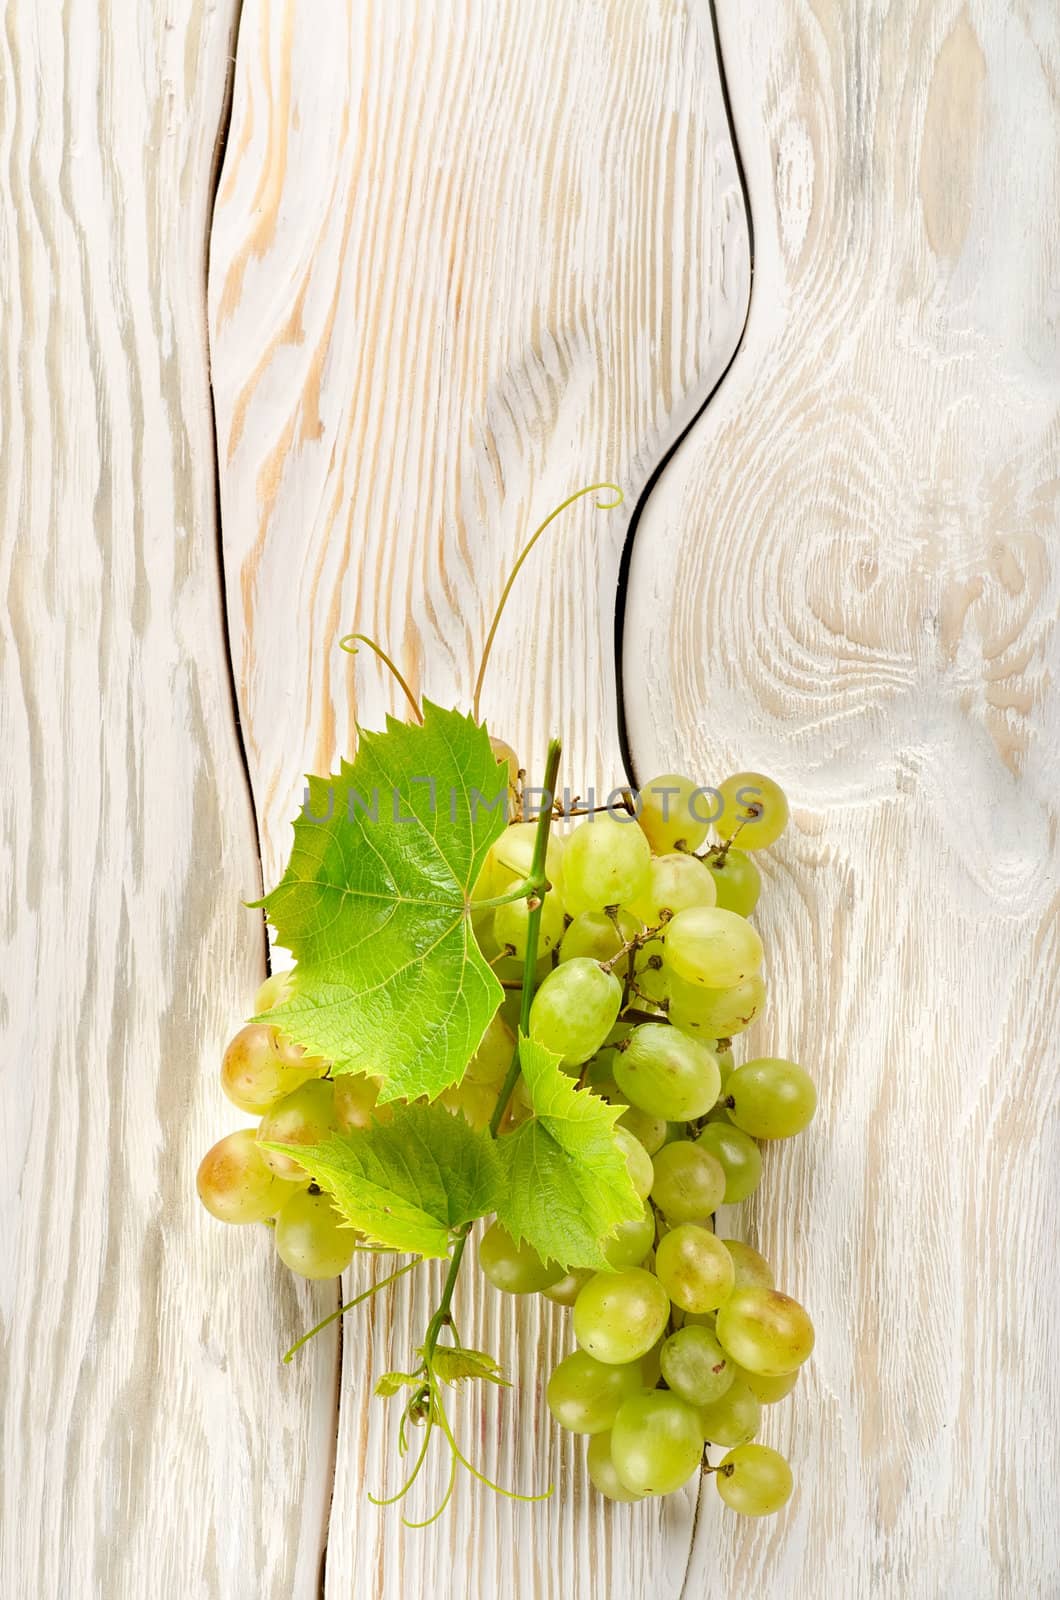 Green grapes on a white wooden background